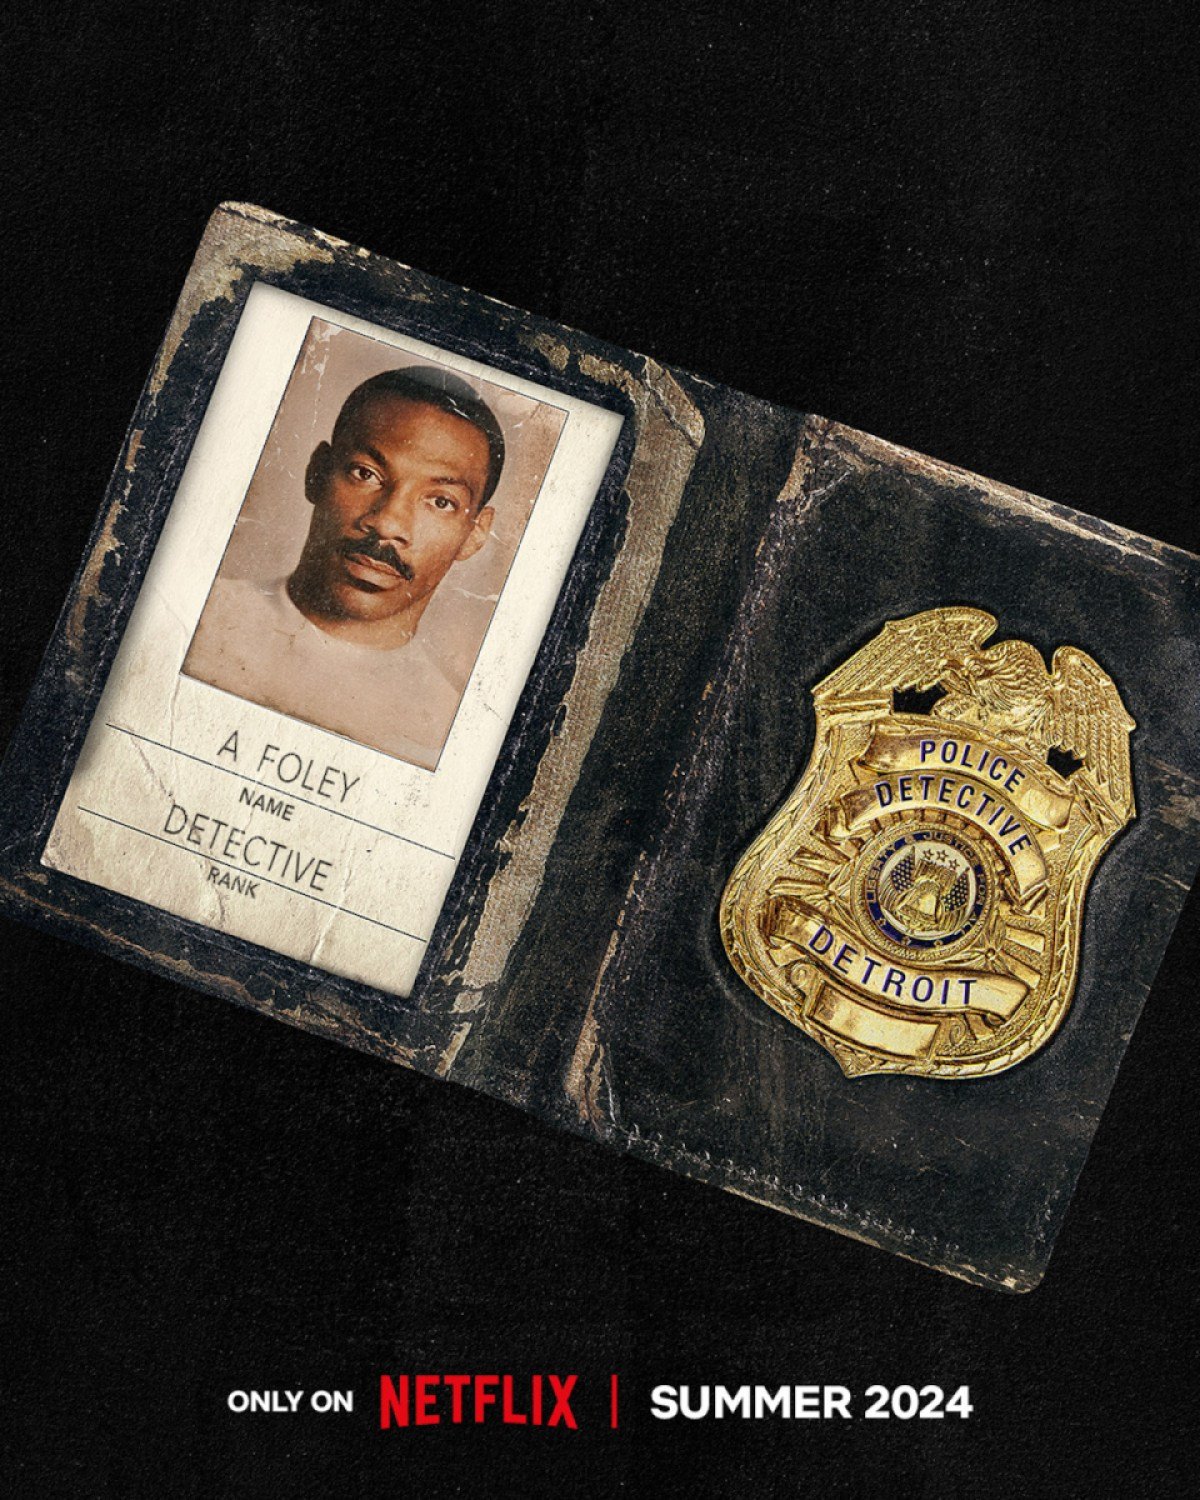 Axel Foley's wallet and badge from Beverly Hills Cop 4